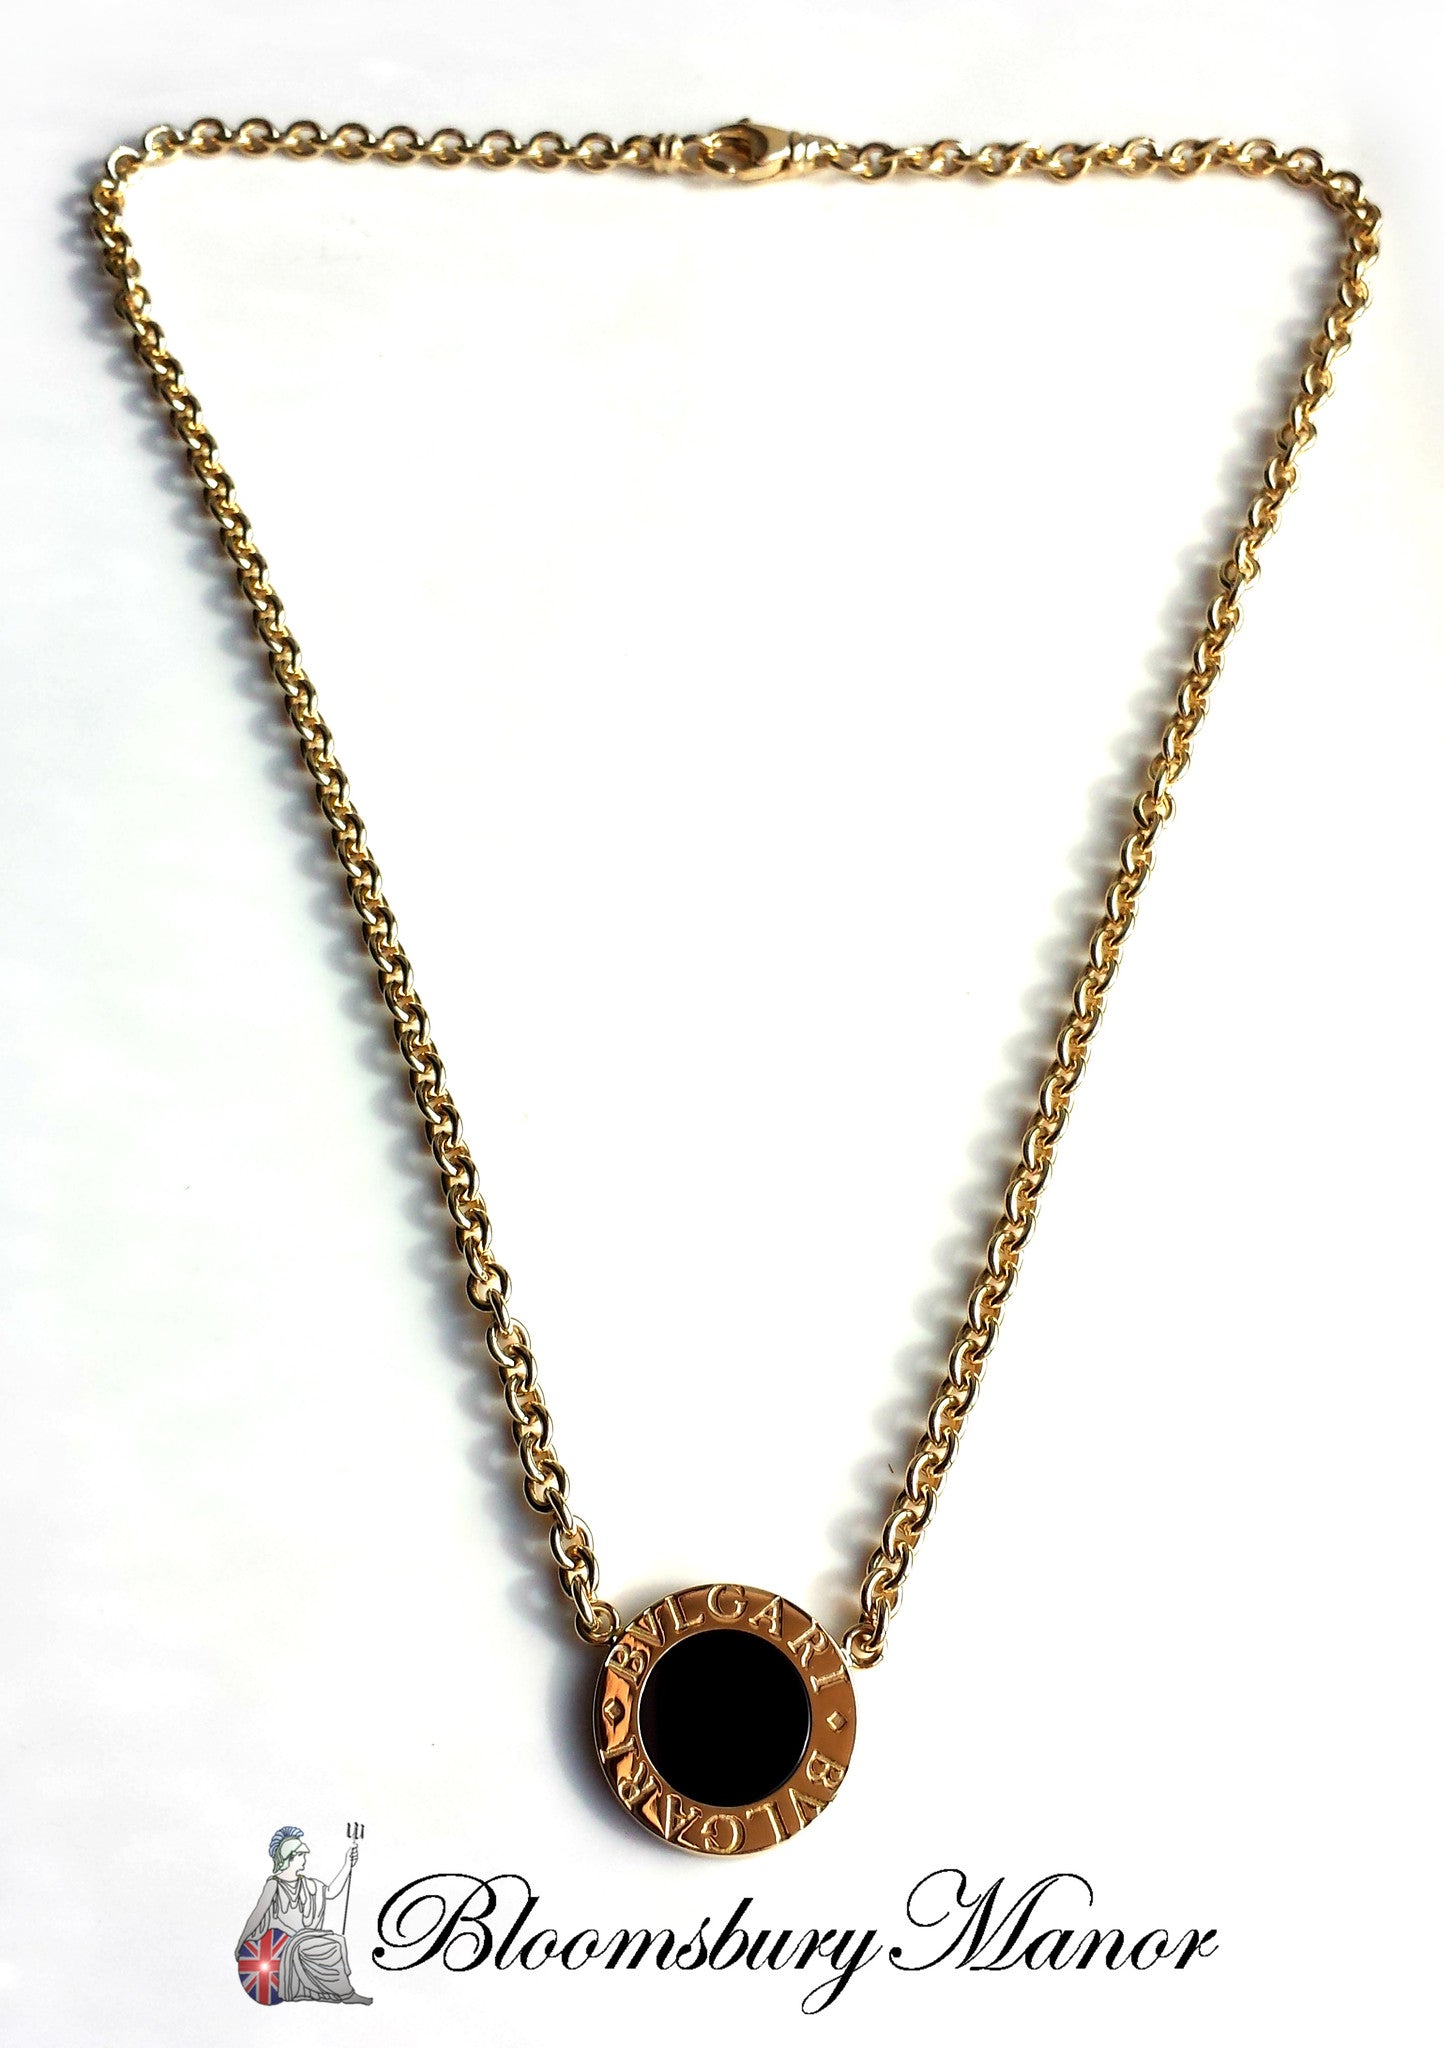 Bvlgari Necklace in 18K Yellow Gold 